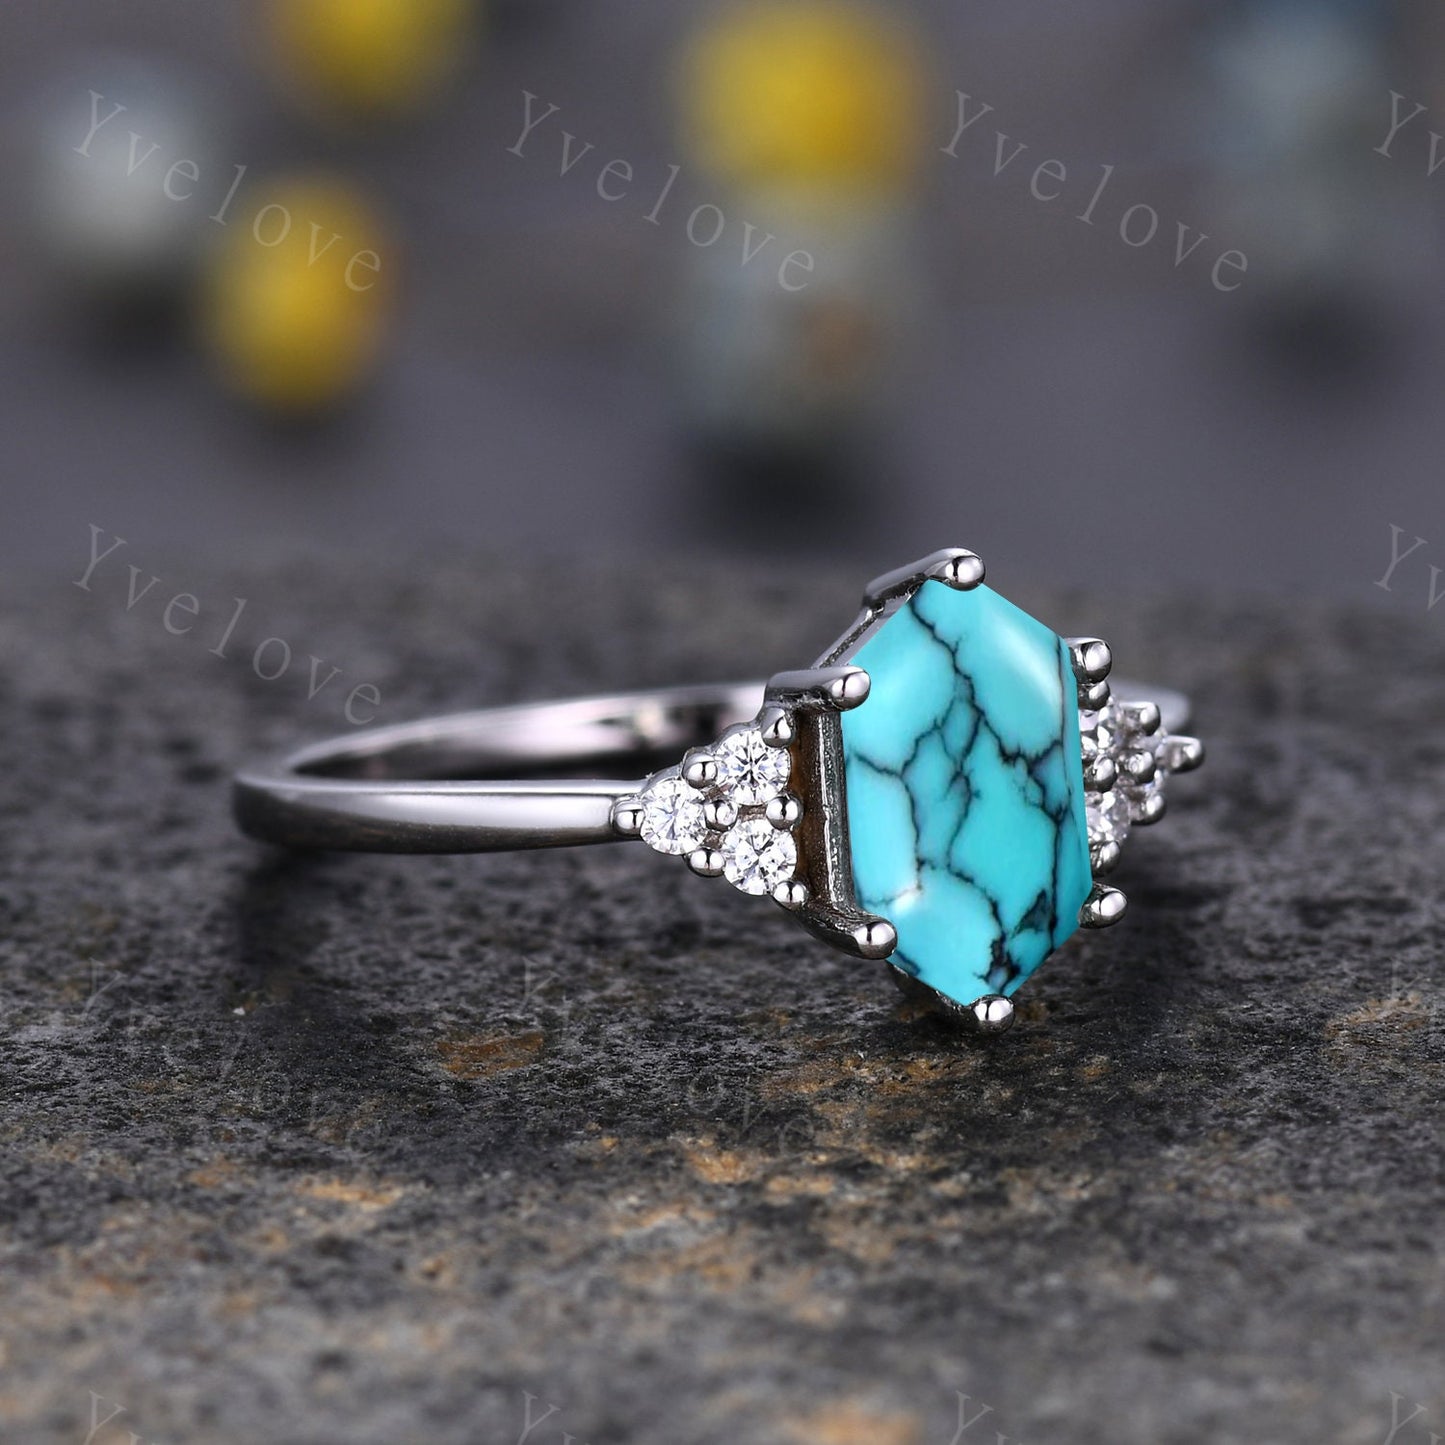 Retro Hexagon Turquoise Ring,Vintage Sterling Silver Ring Set,Unique Turquoise Engagement Ring,Promise Ring,Anniversary Ring Gift For Her